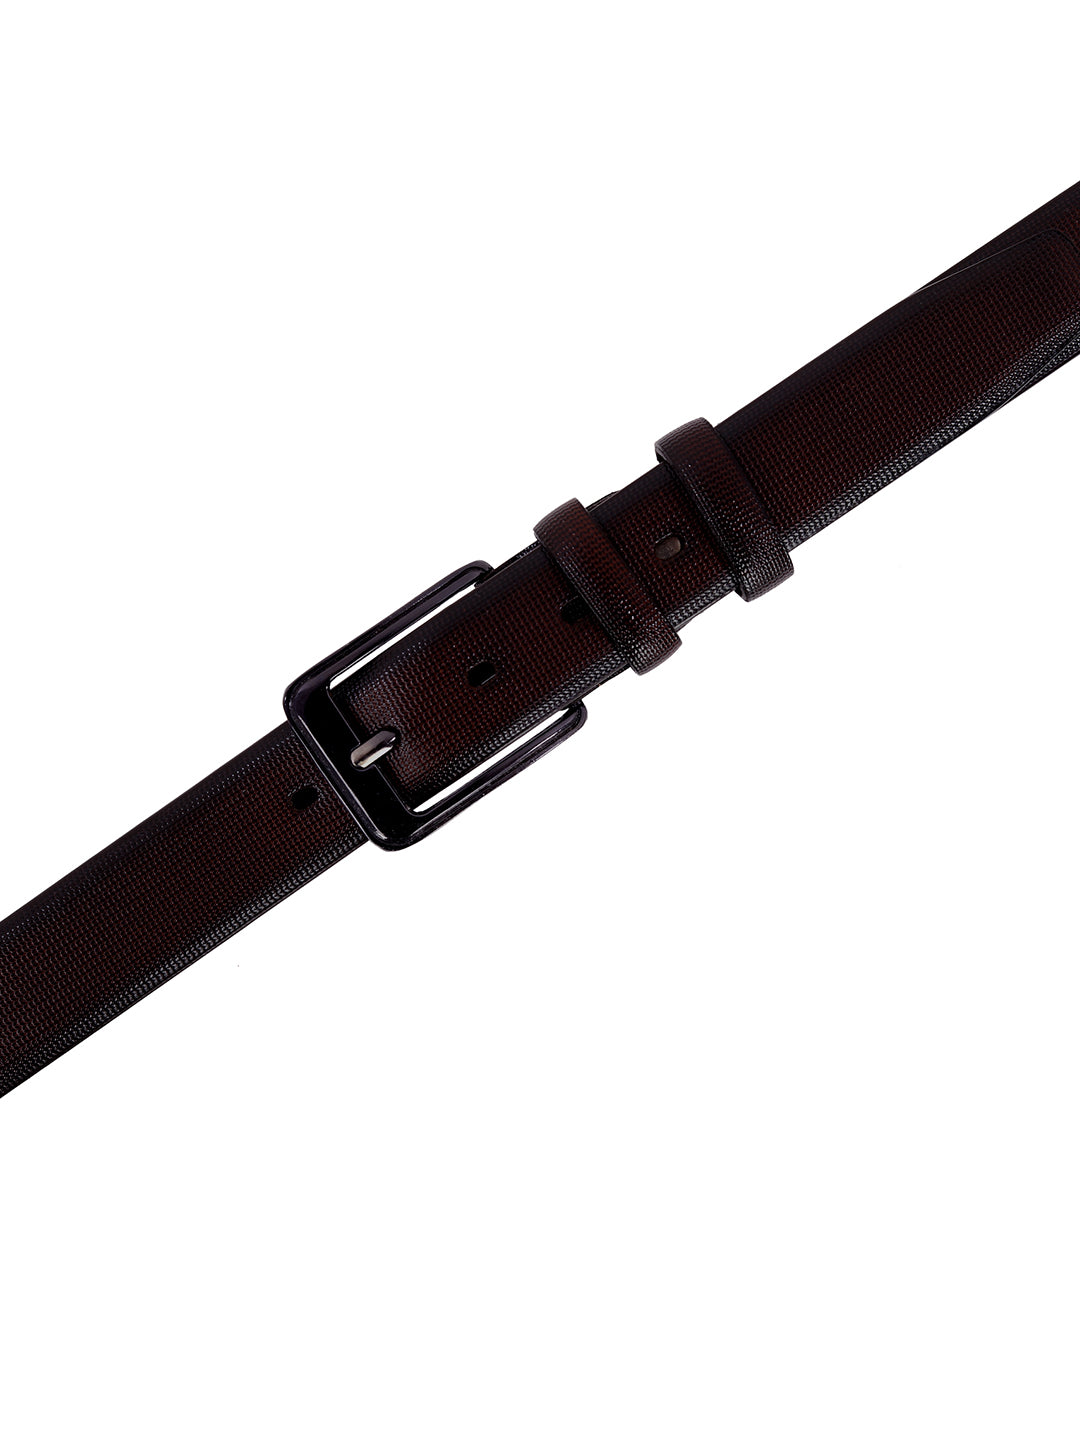 Leather World Pin Lock Buckle Genuine Leather Formal Casual Brown Belt For Men Elegant Gift Box